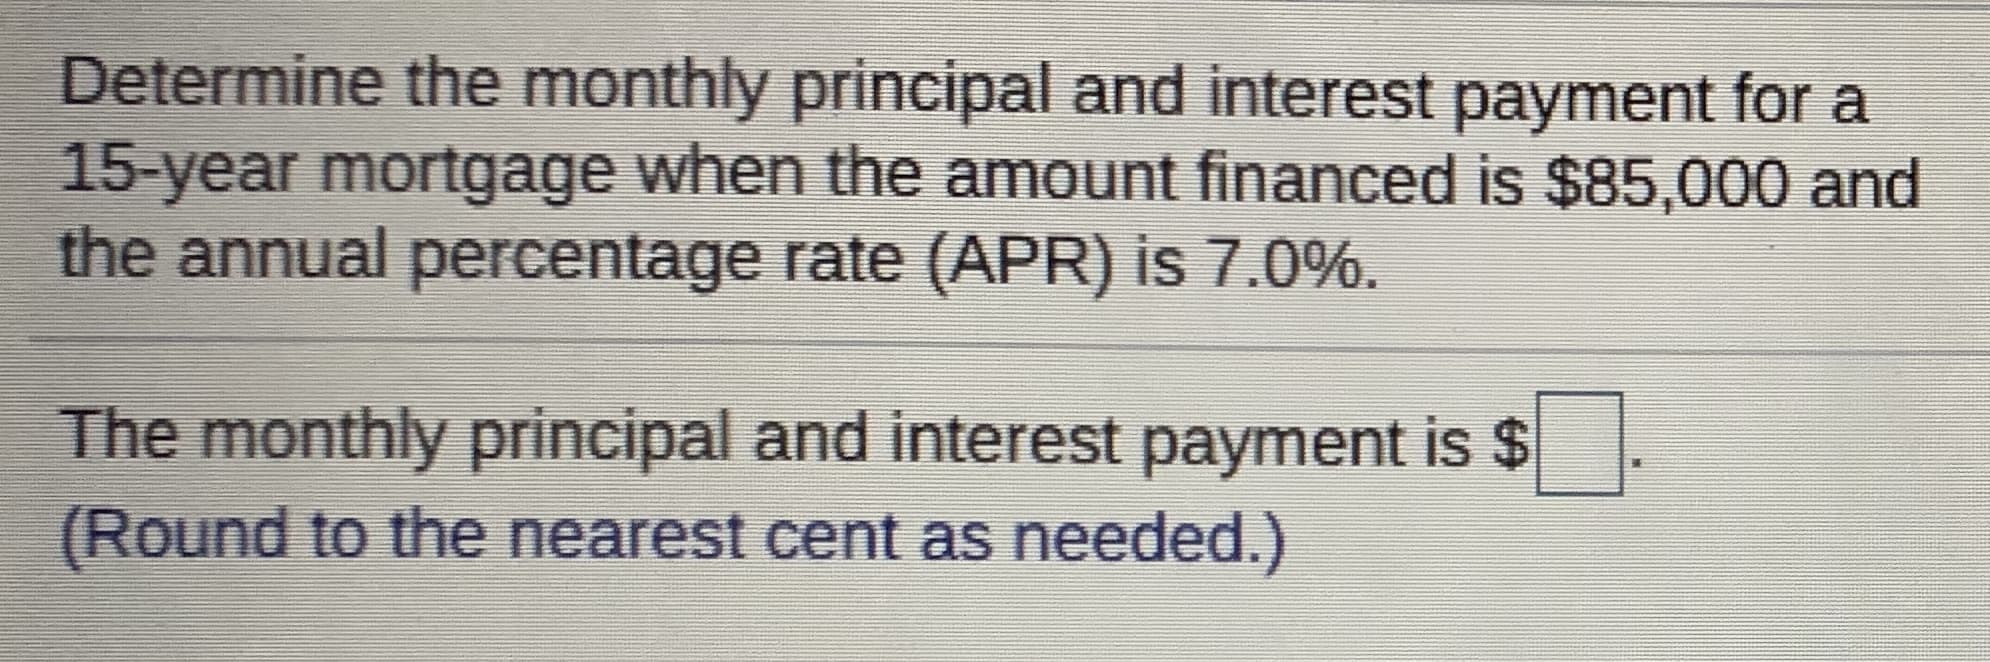 Determine the monthly principal and interest payment for a
15-year mortgage when the amount financed is $85,000 and
the annual percentage rate (APR) is 7.0%.
The monthly principal and interest payment is $
(Round to the nearest cent as needed.)
